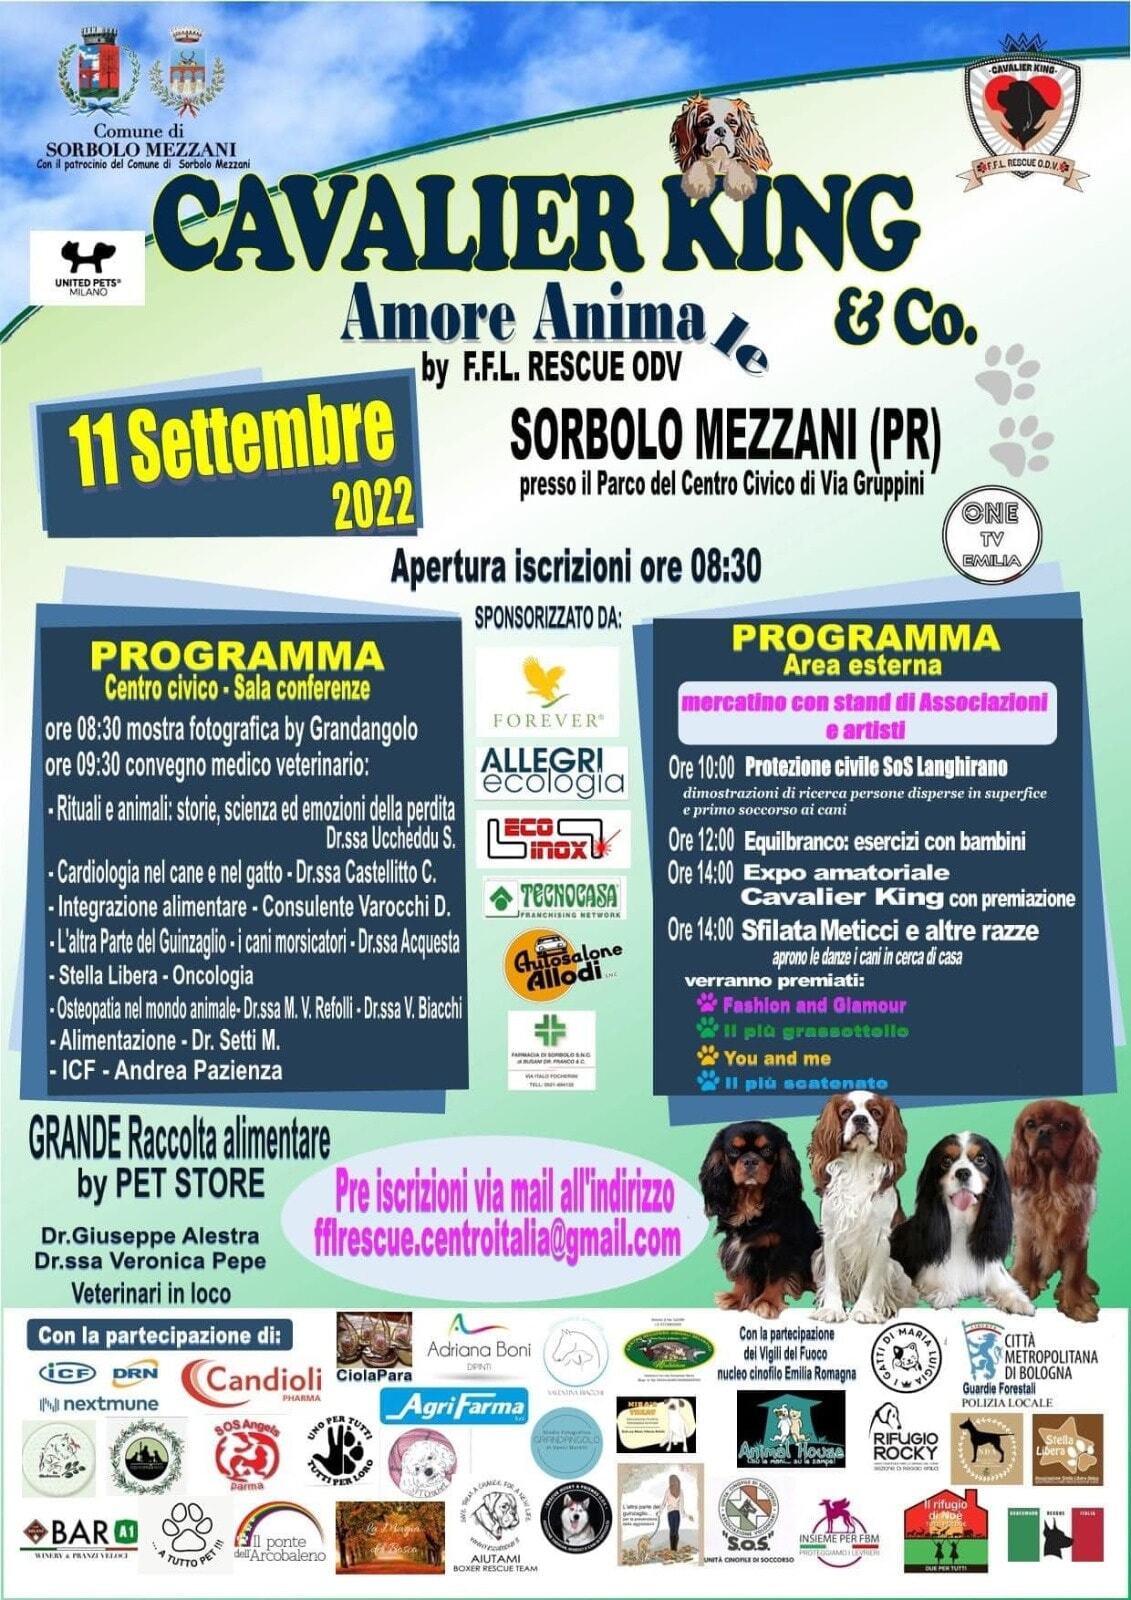 “Cavalier King & Co.-Amore animale” a Sorbolo